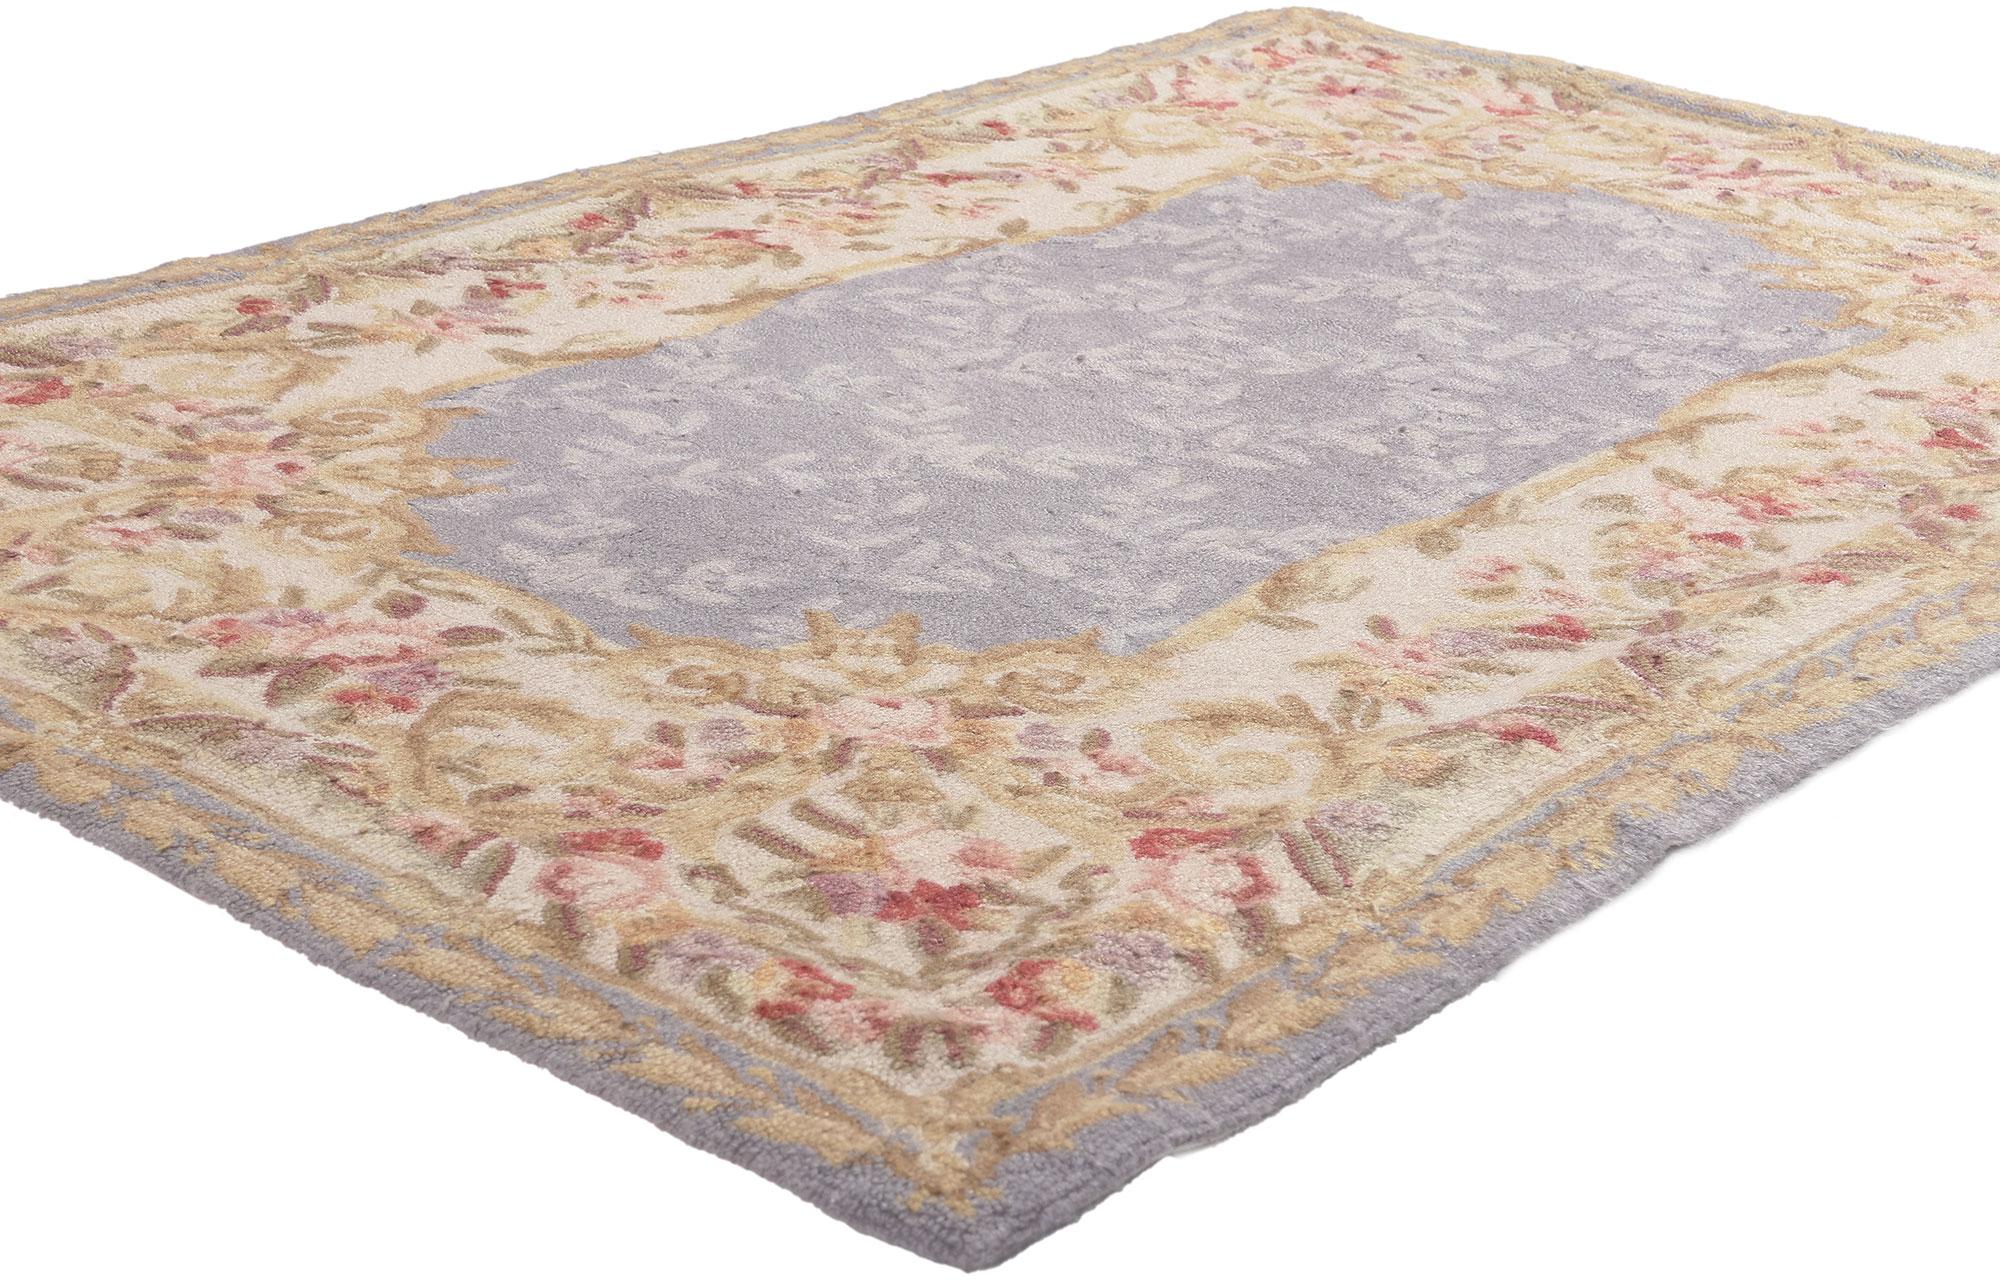 78552 Vintage Aubusson American Hooked Rug, 03'05 x 05'05.
Take a floral design and understated elegance, mix in a dash of romantic connotations and rustic sensibility to get this fresh look that’s as comfortable as it is chic. The composition